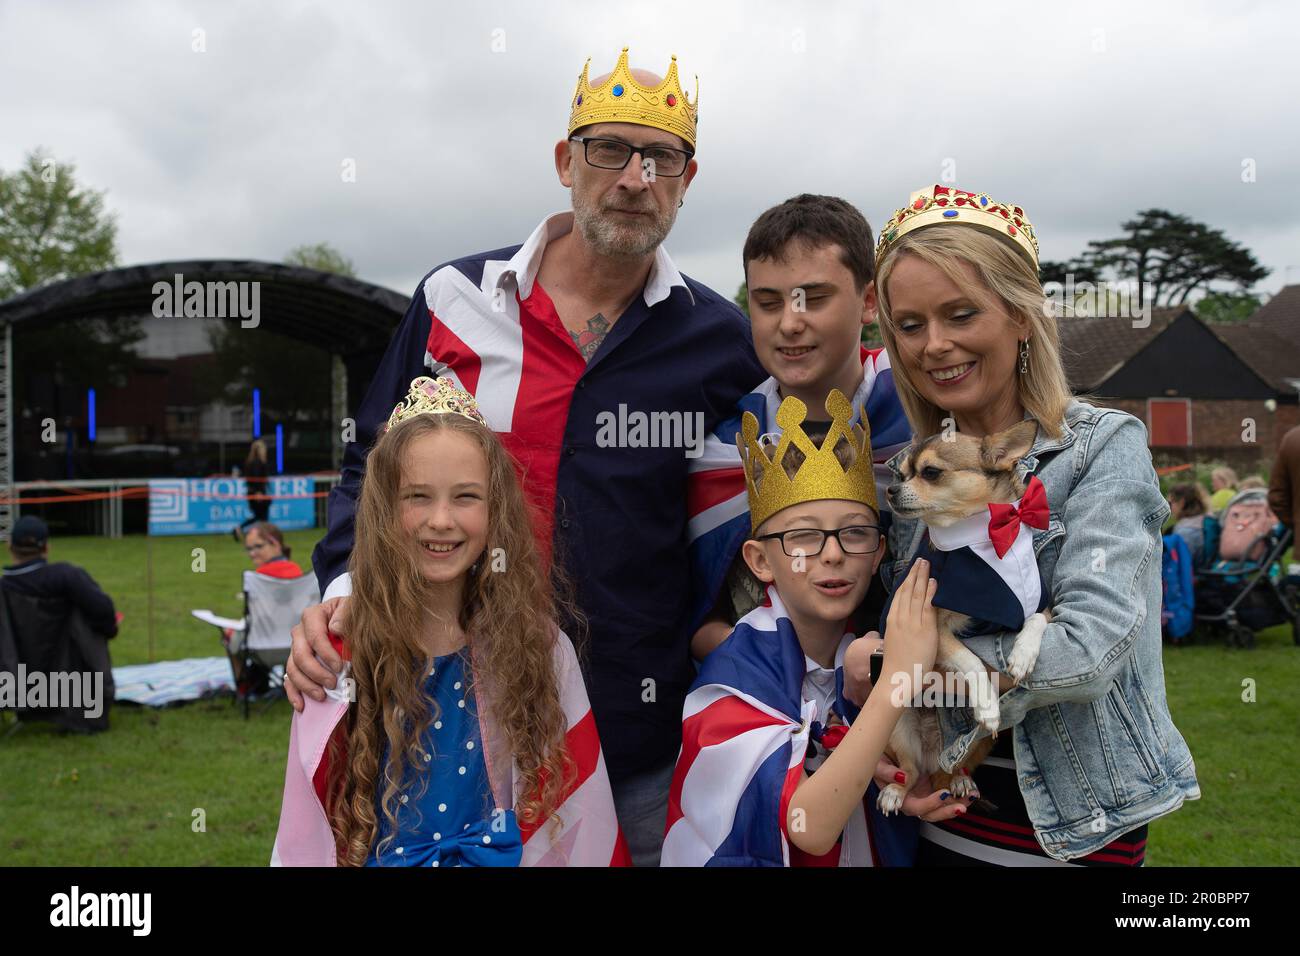 Datchet, Berkshire, UK. 7th May, 2023. The Allmark family and Tuco the dog at the Datchet Coronation Fete in Berkshire, Datchet. Credit: Maureen McLean/Alamy Live News Stock Photo